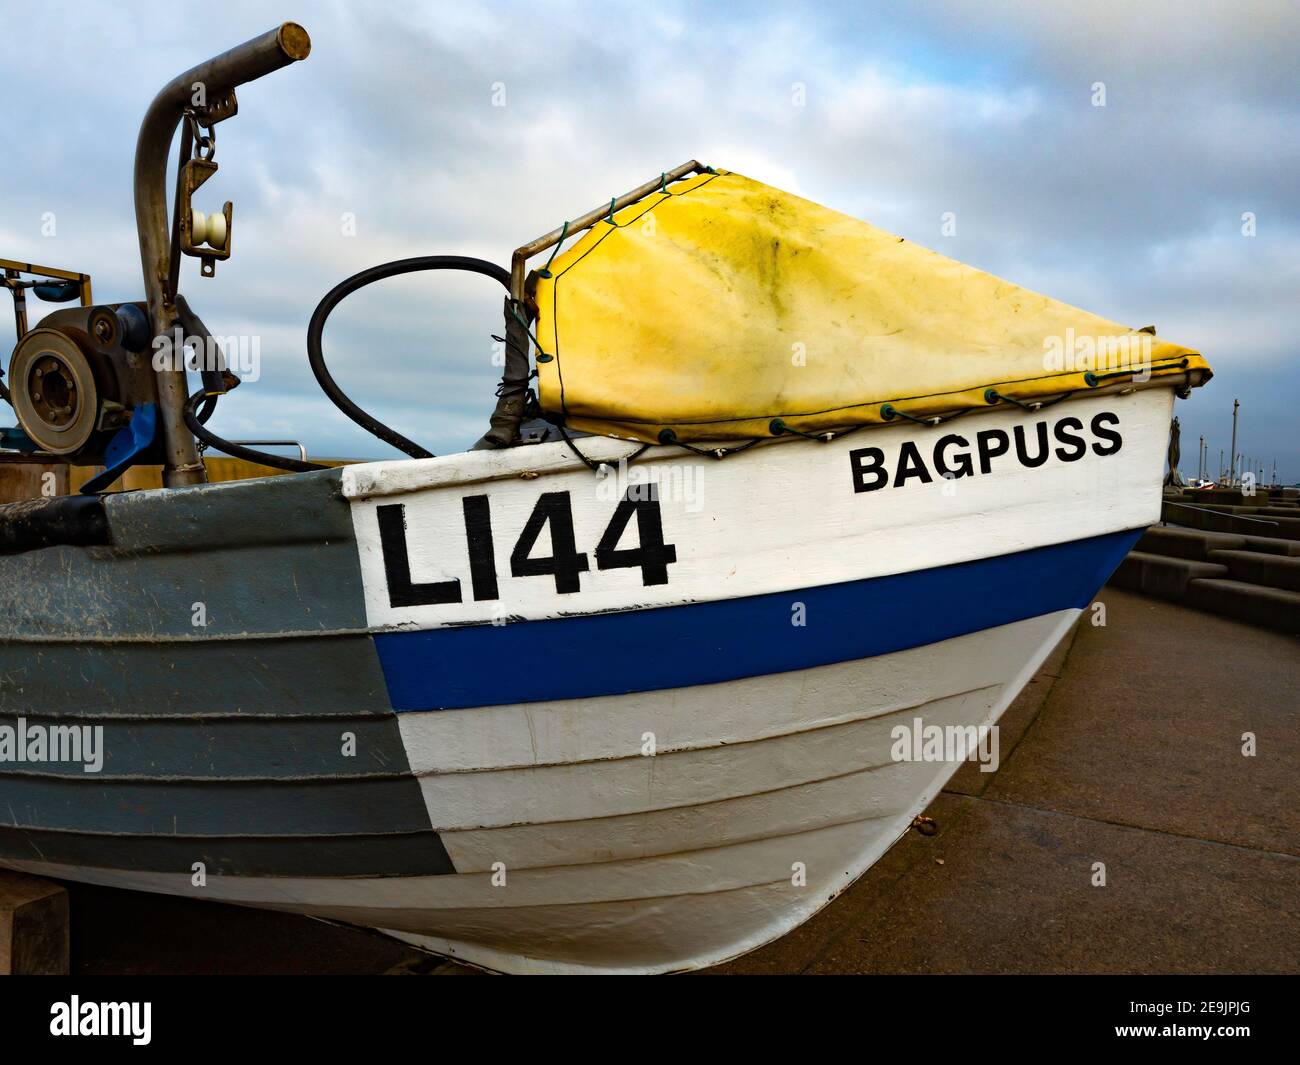 Bow detail of Bagpuss an inshore fishing boat registration L144 on the Esplanade Redcar North Yorkshire Stock Photo